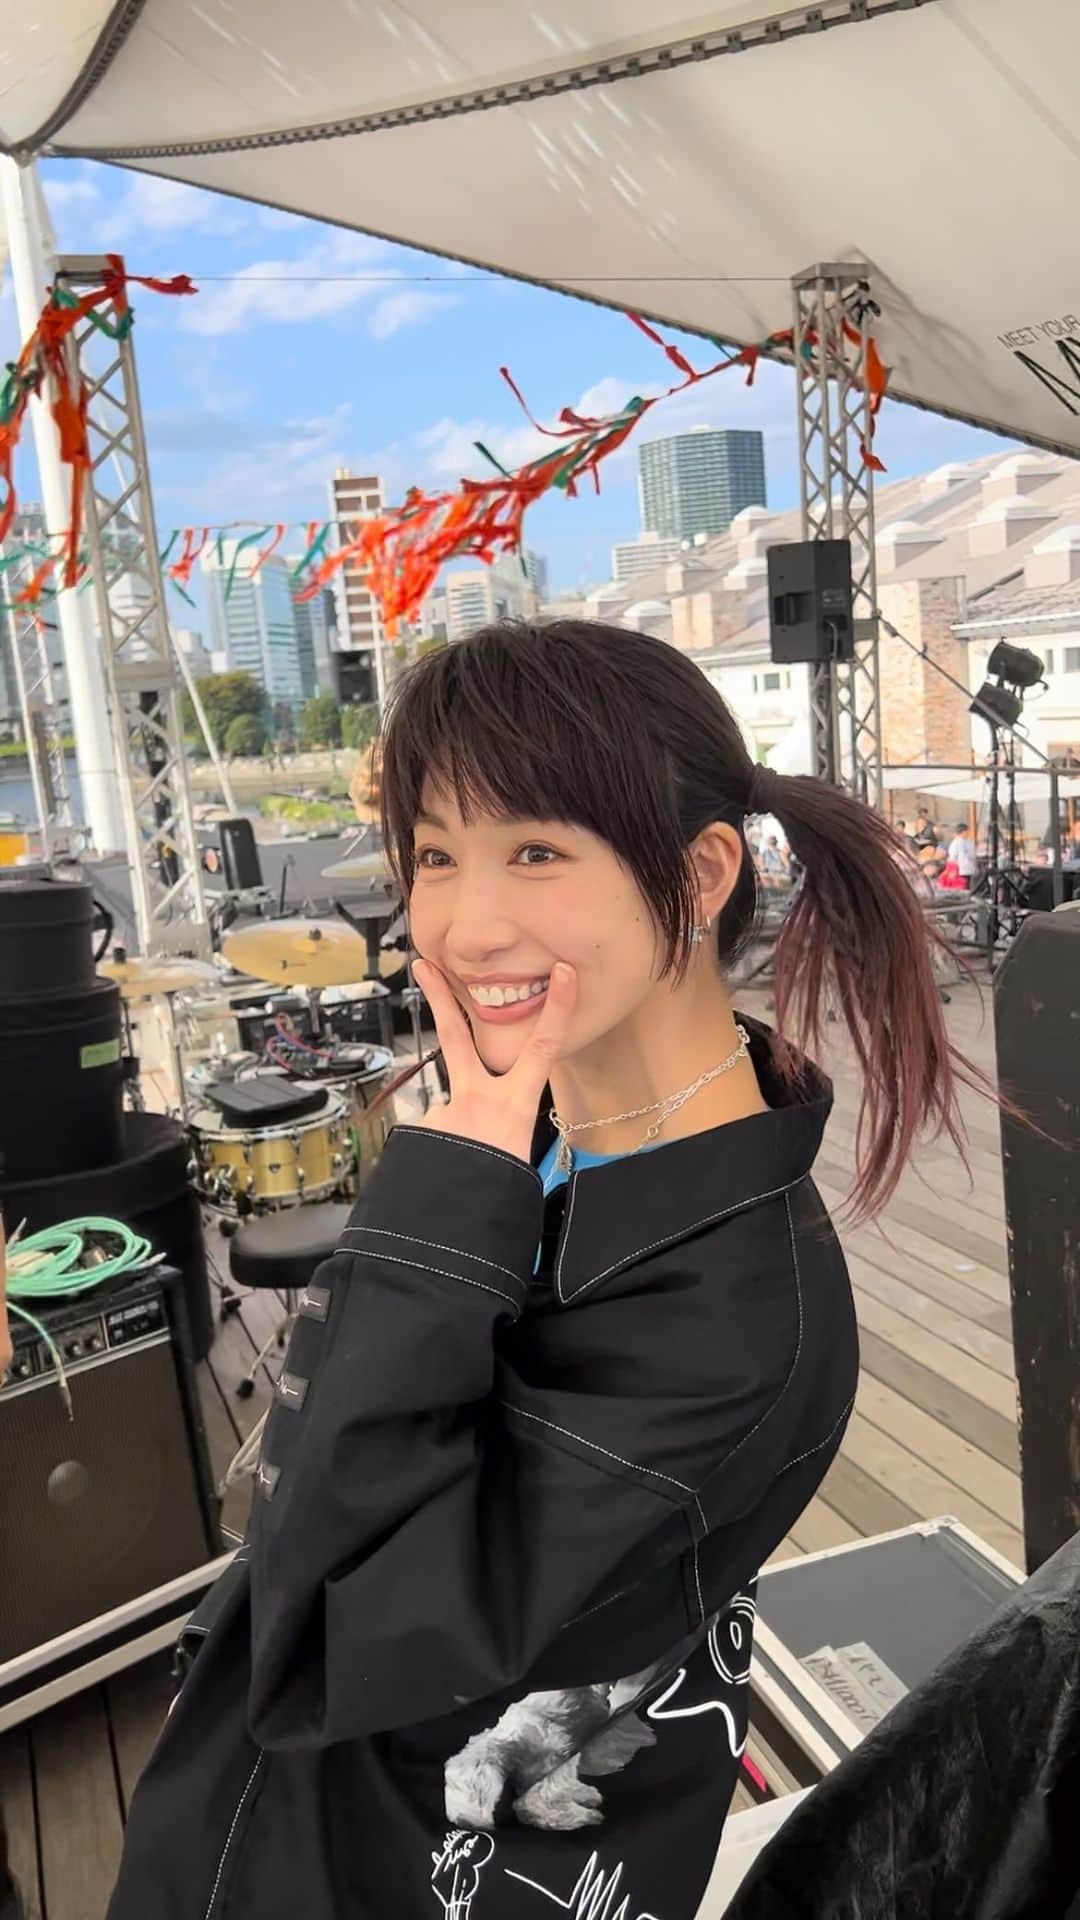 tricotのインスタグラム：「MEET YOUR ART FESTIVAL 2023 7 Oct, 2023 at Tennozu Isle, Tokyo  Special Acoustic Live  potage サマーナイトタウン - Summer Night Town 鯨 - KUJIRA after school 夜の魔物 - Night monster  @meet_your_art  #myaf #myaf2023 #meetyourart #tricot #tricot_band」